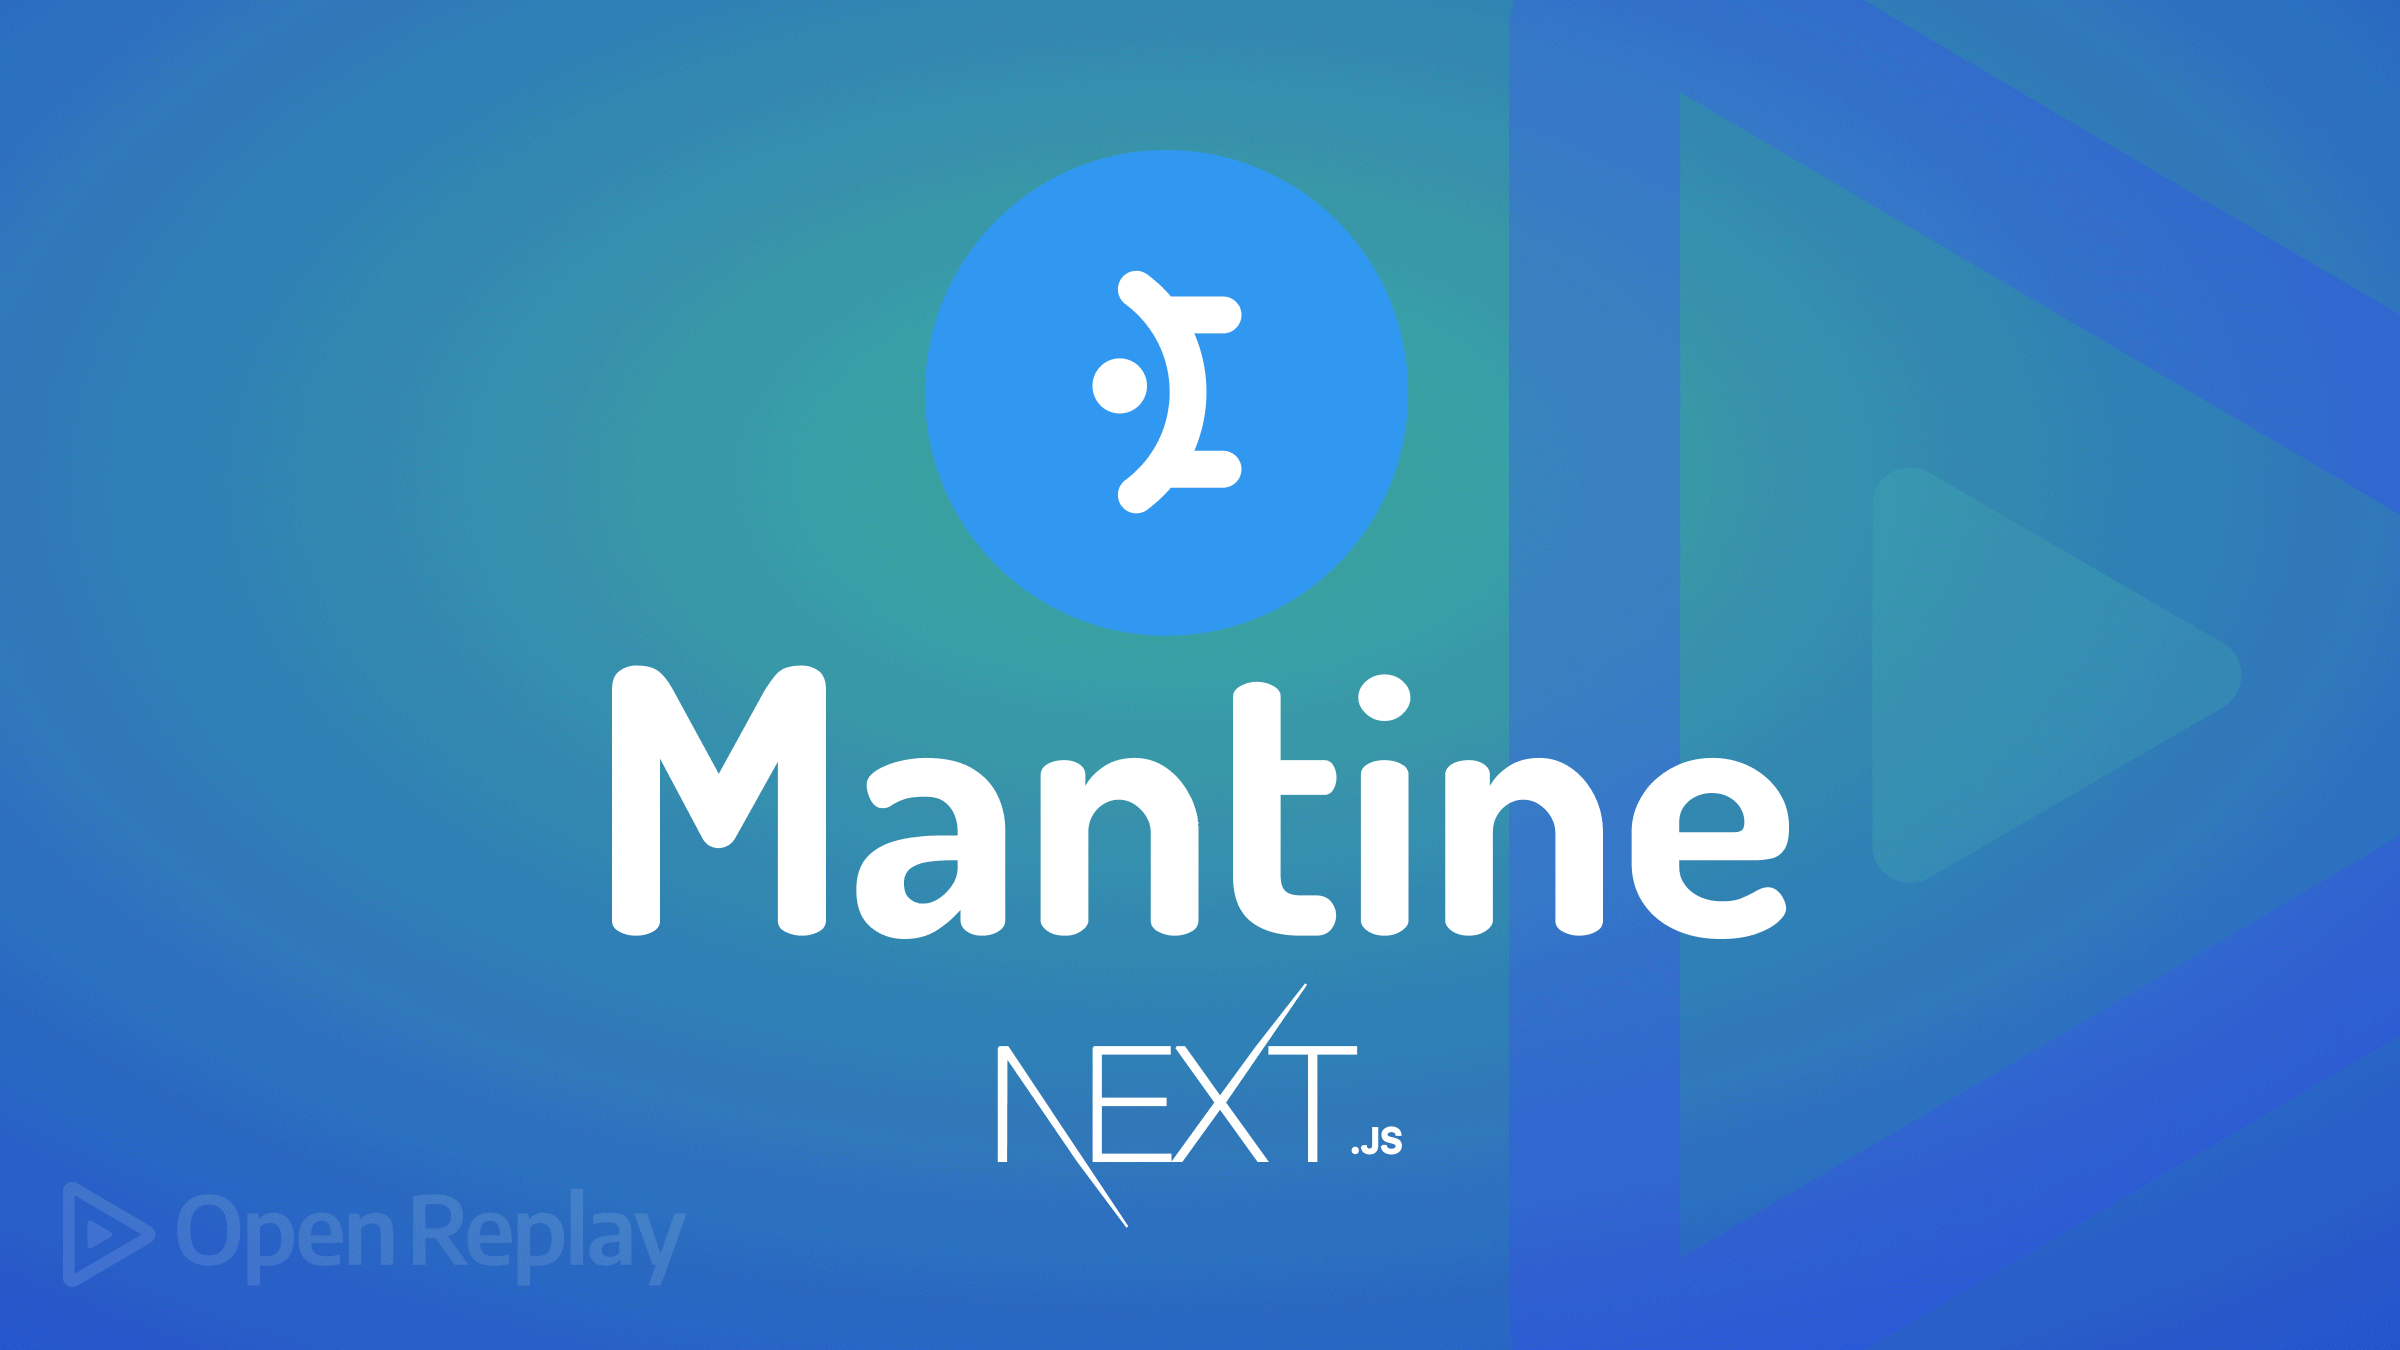 How-to Use Mantine with React and Next.js